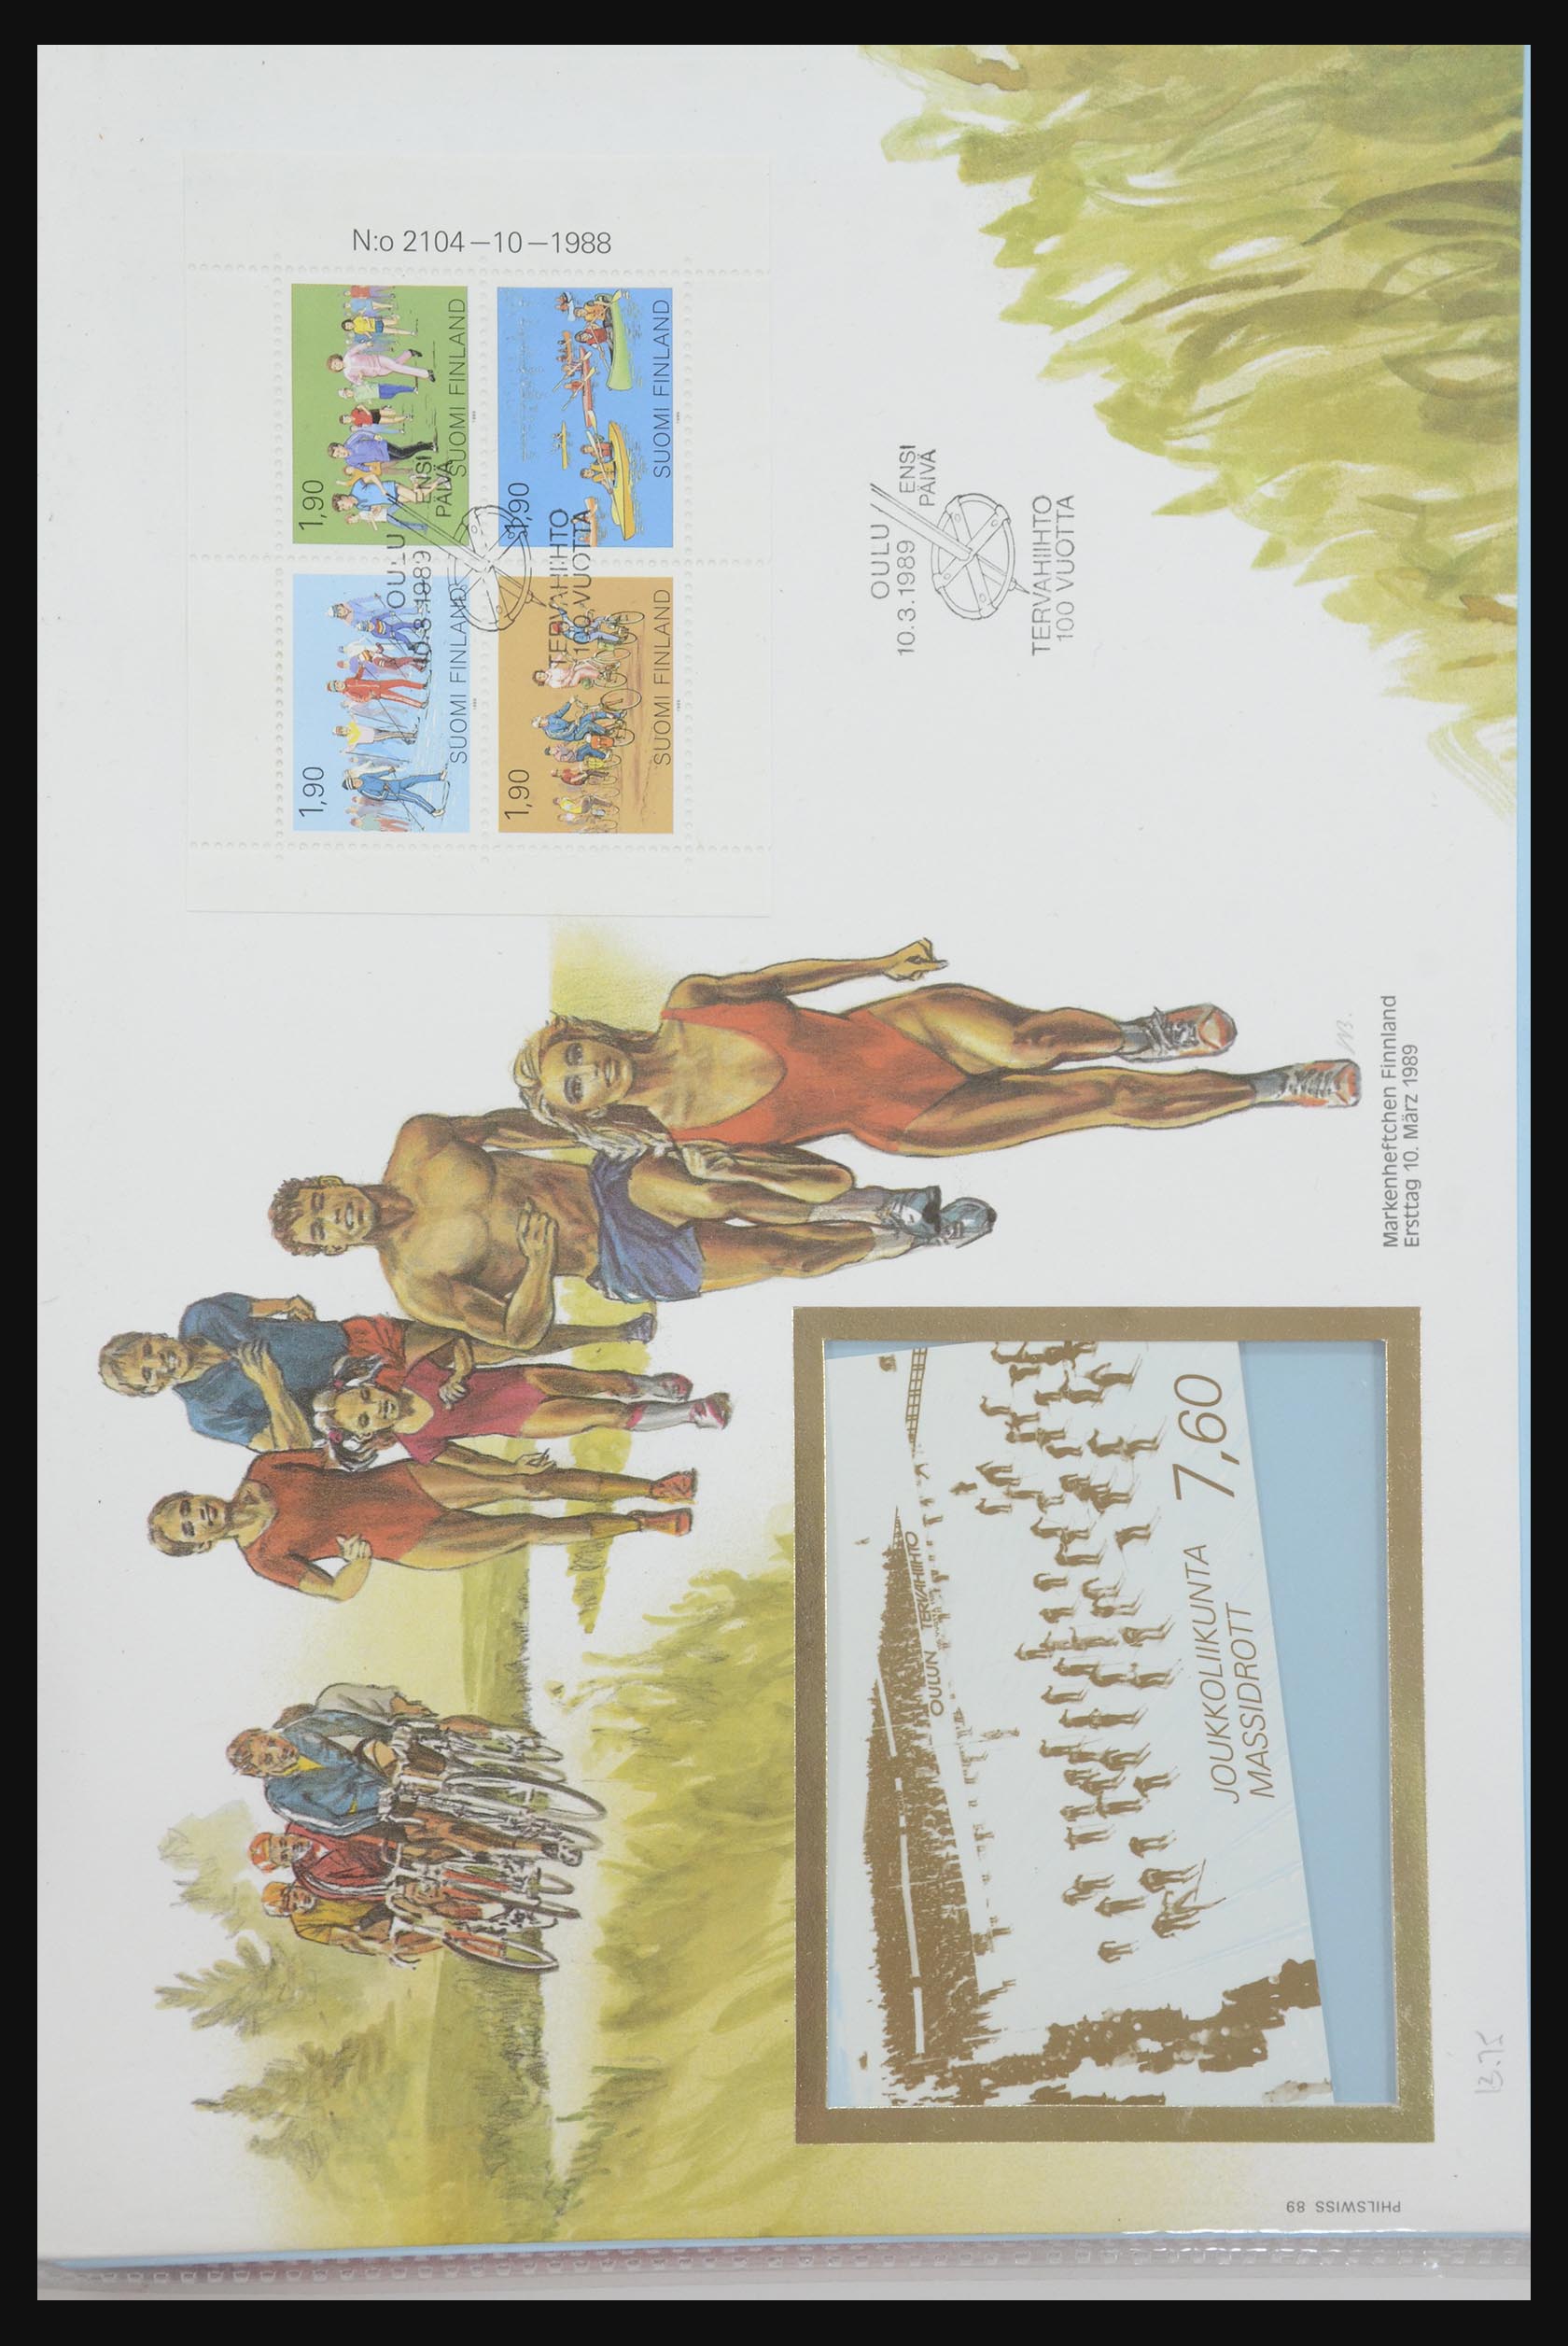 31915 436 - 31915 Western Europe souvenir sheets and stamp booklets on FDC.